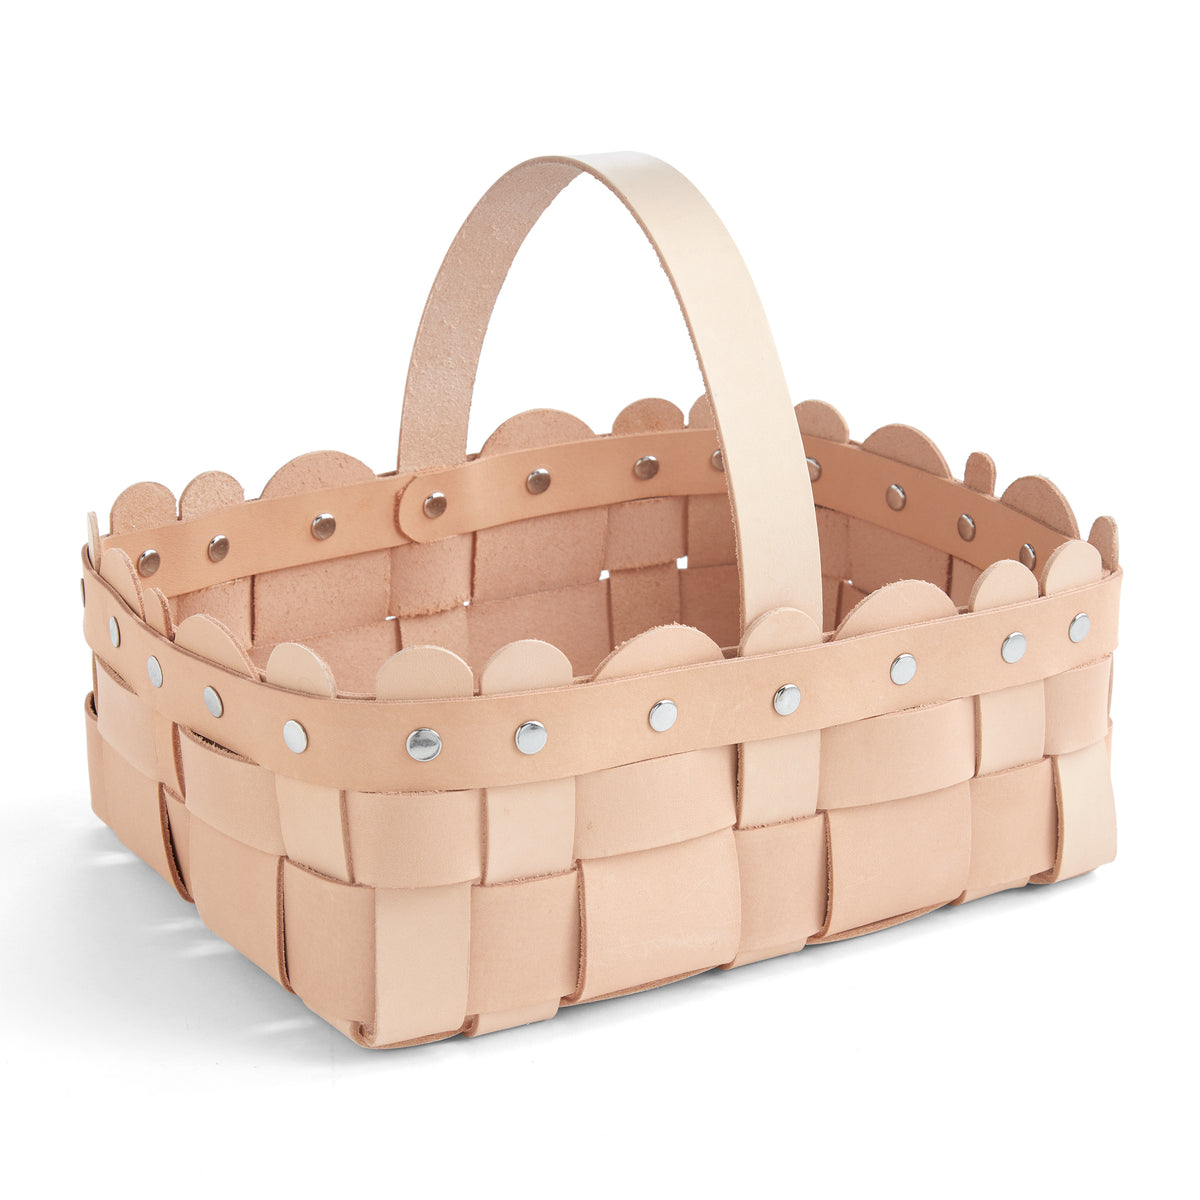 Woven Basket Kit — Tandy Leather, Inc.